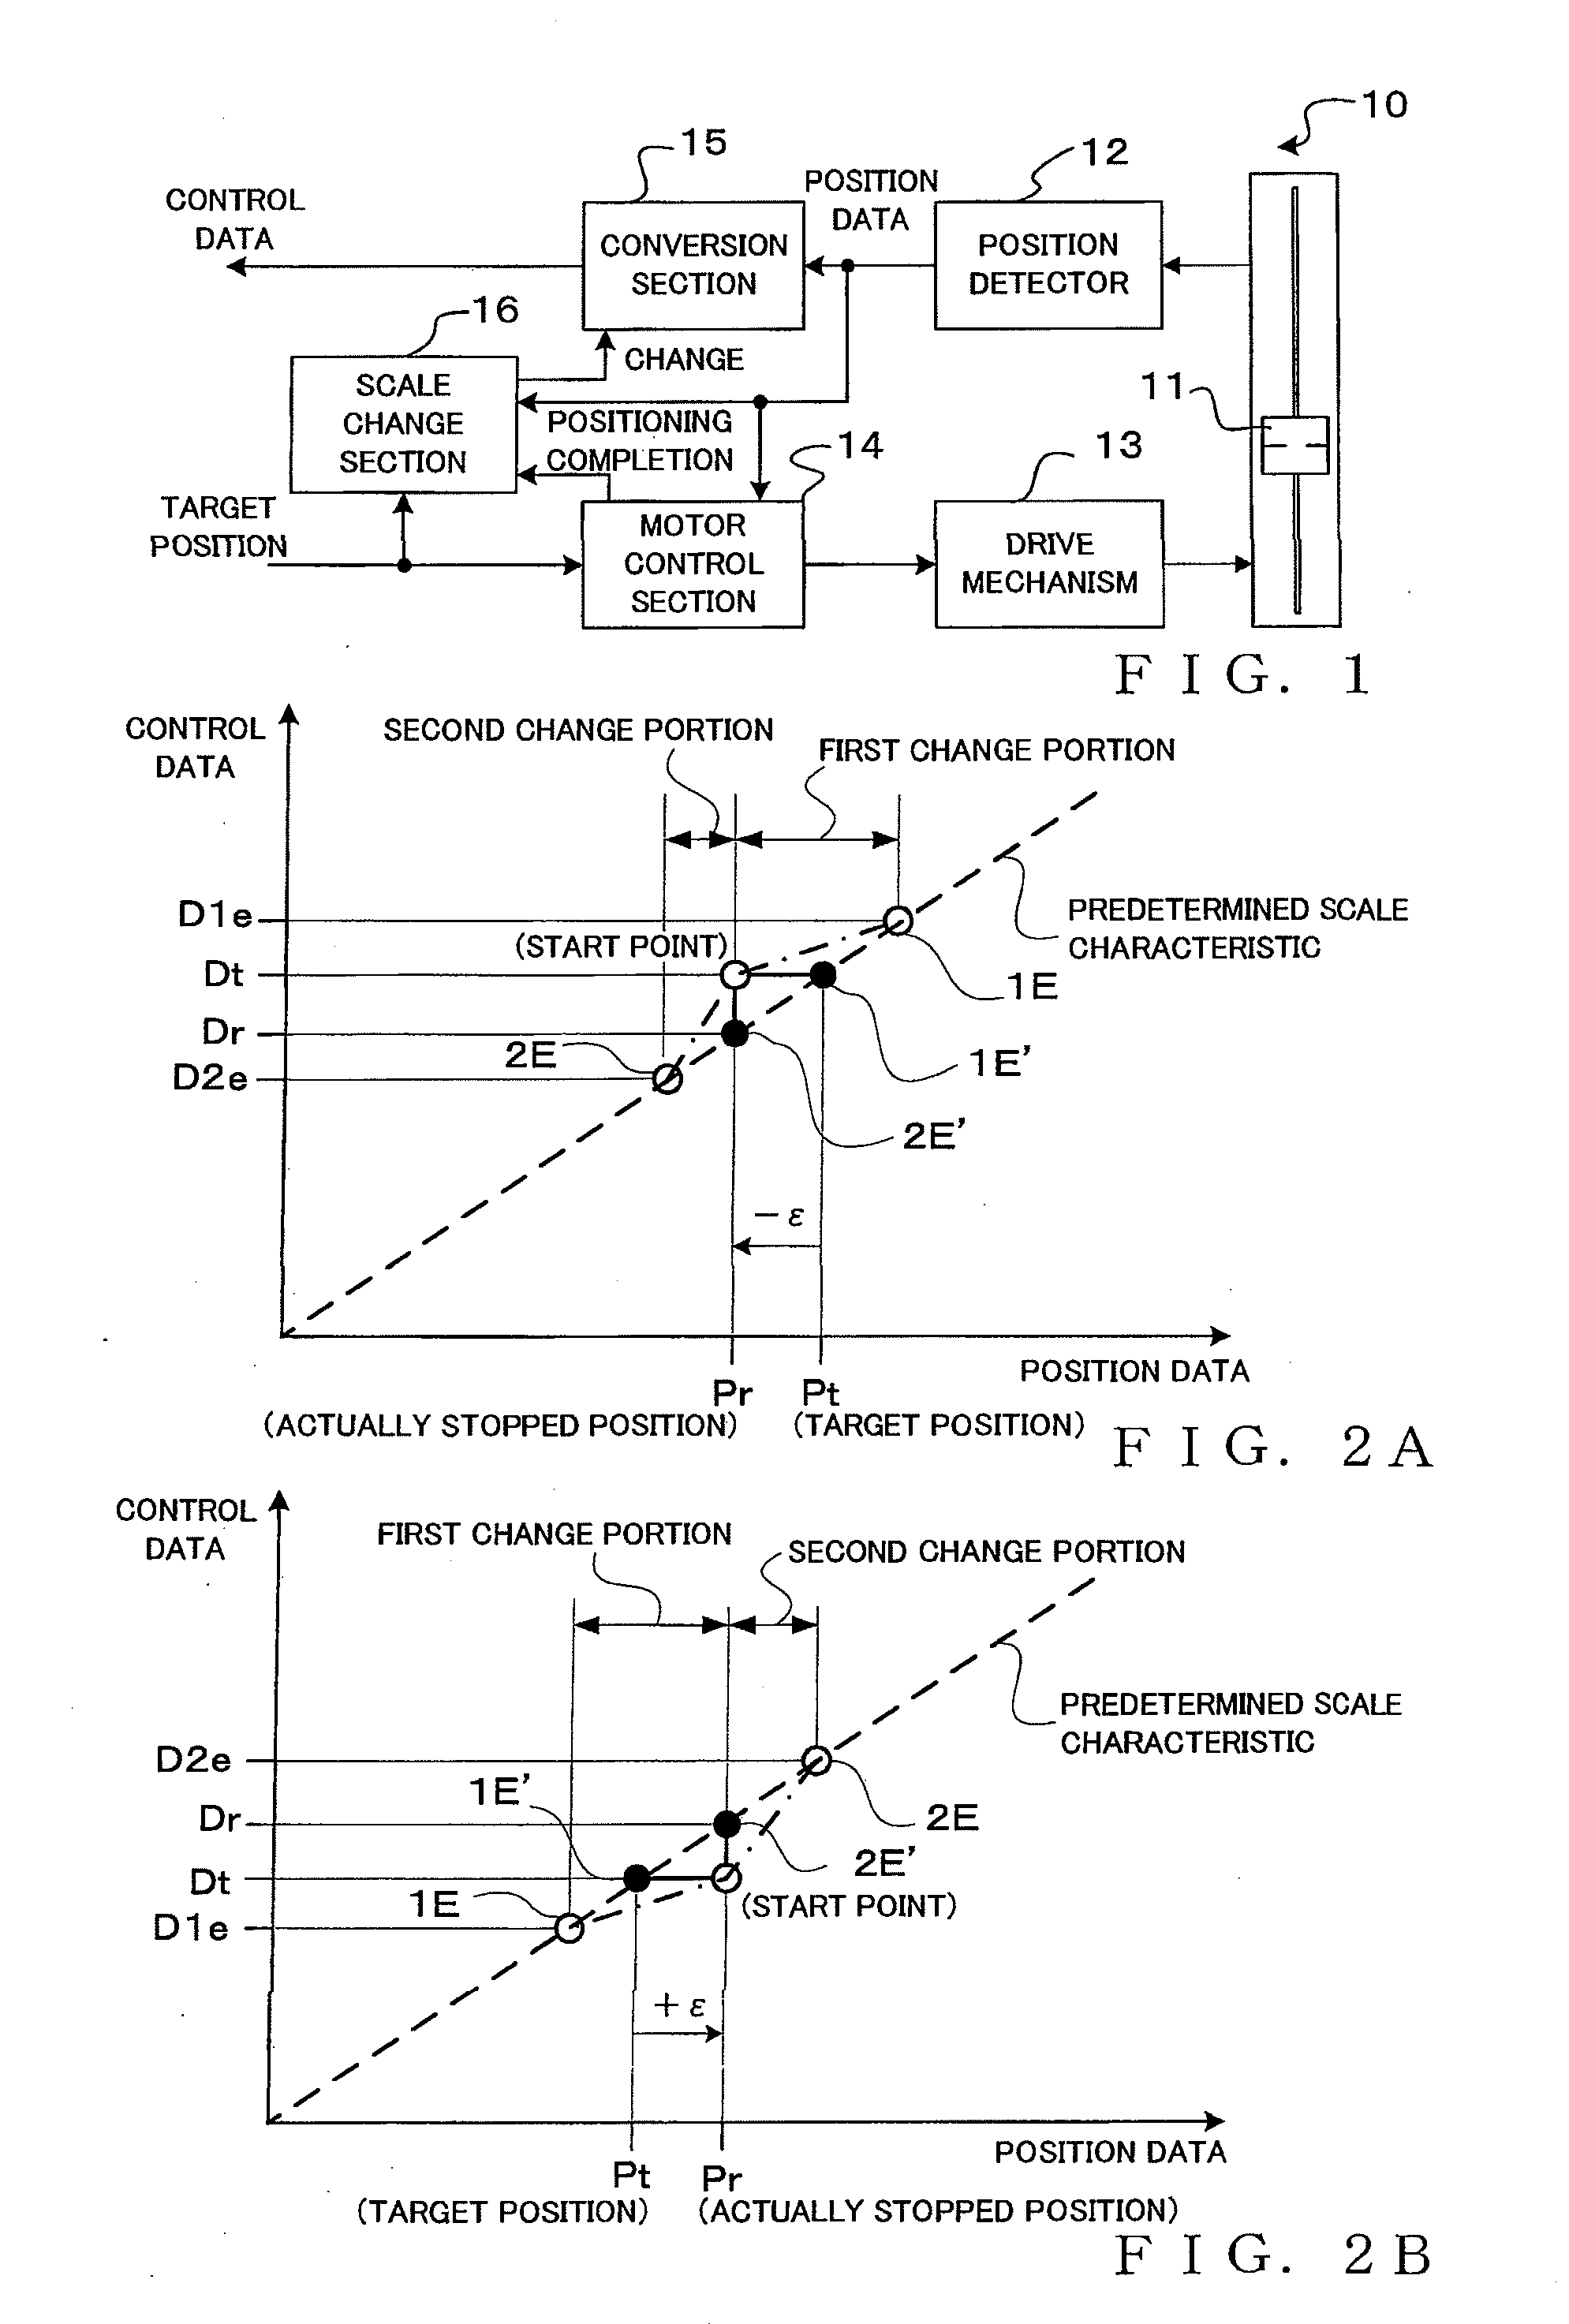 Control Data Generation Device and Method